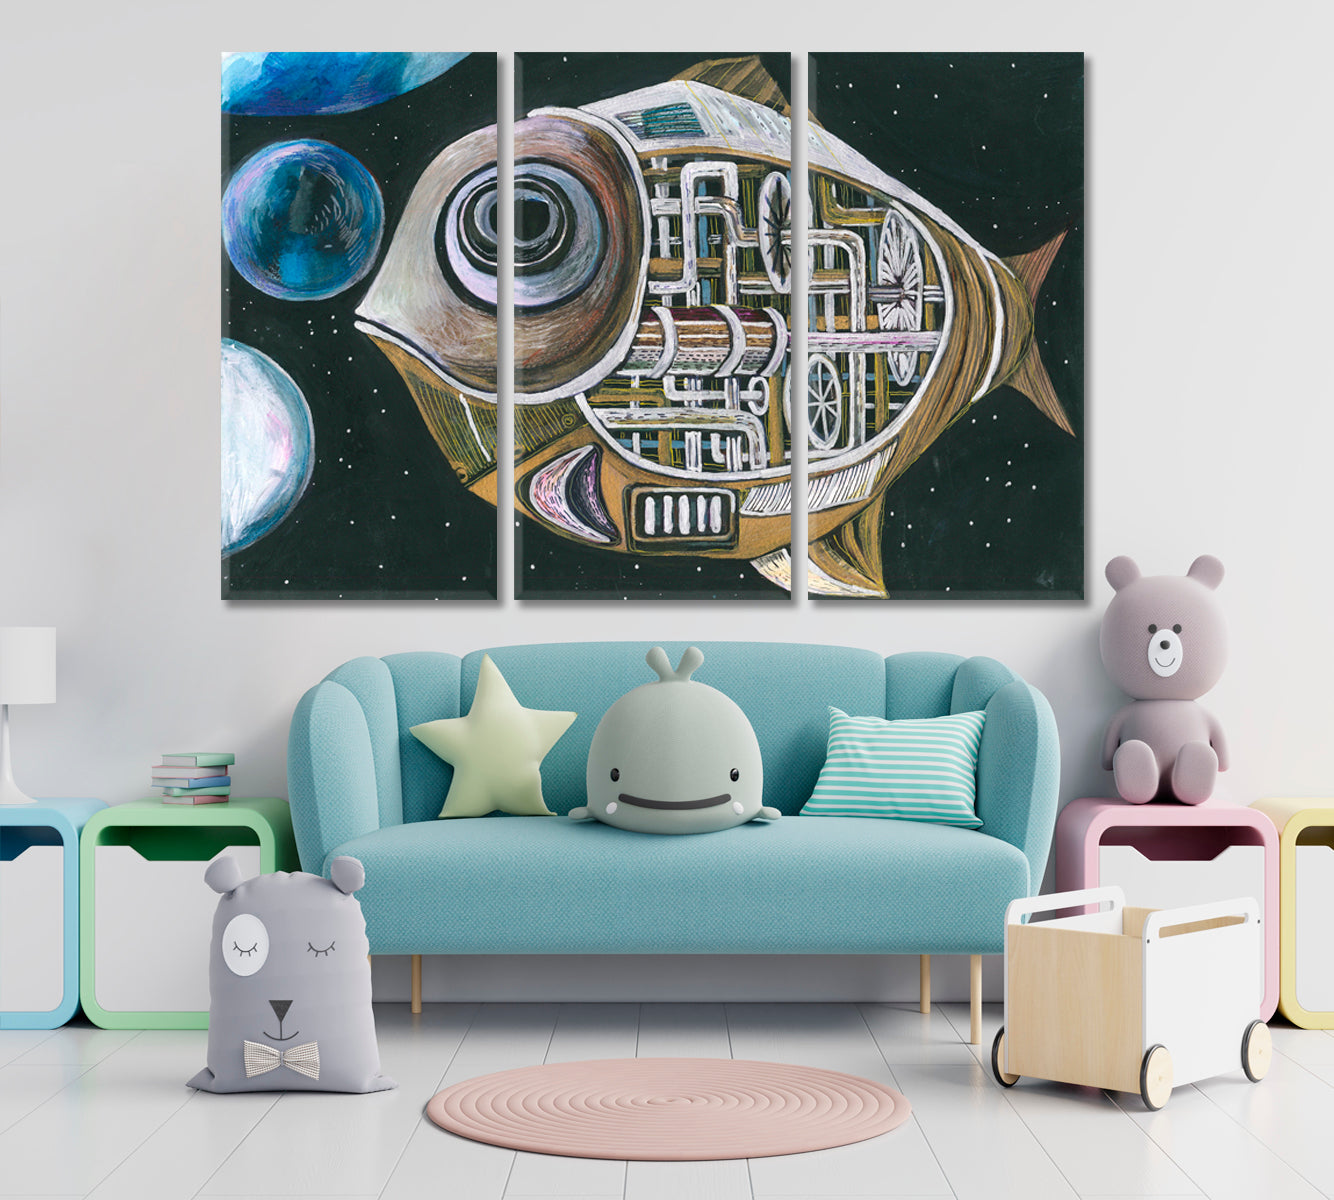 Big Space Mechanical Fish Surreal Abstract Steampunk Style Contemporary Art Artesty 3 panels 36" x 24" 